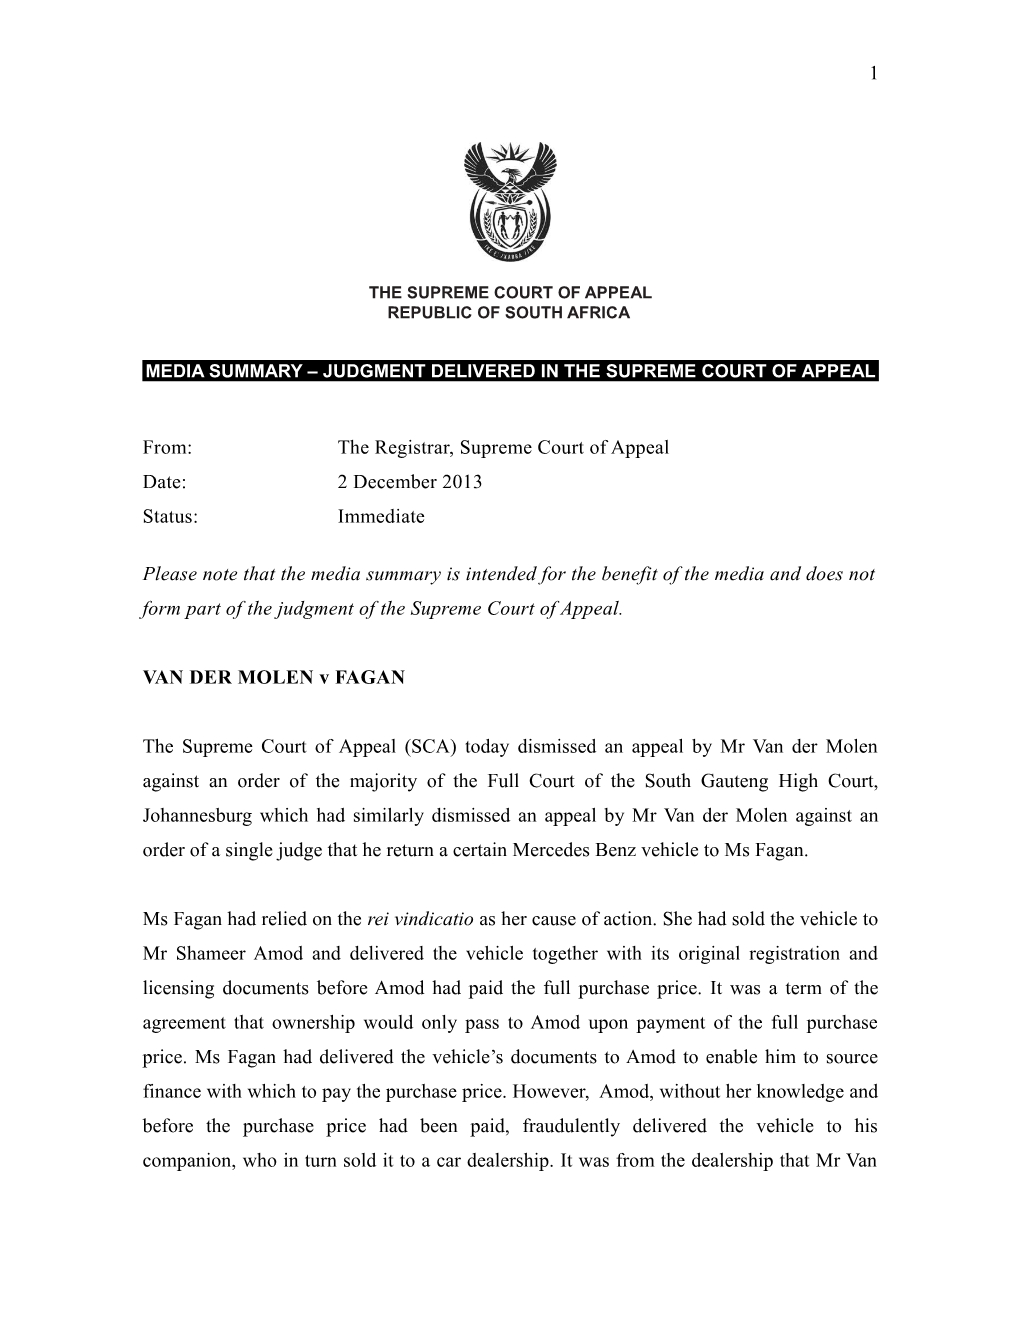 The Appellants Appealed Against an Order Made in the High Court, Pretoria in Terms of Which s1